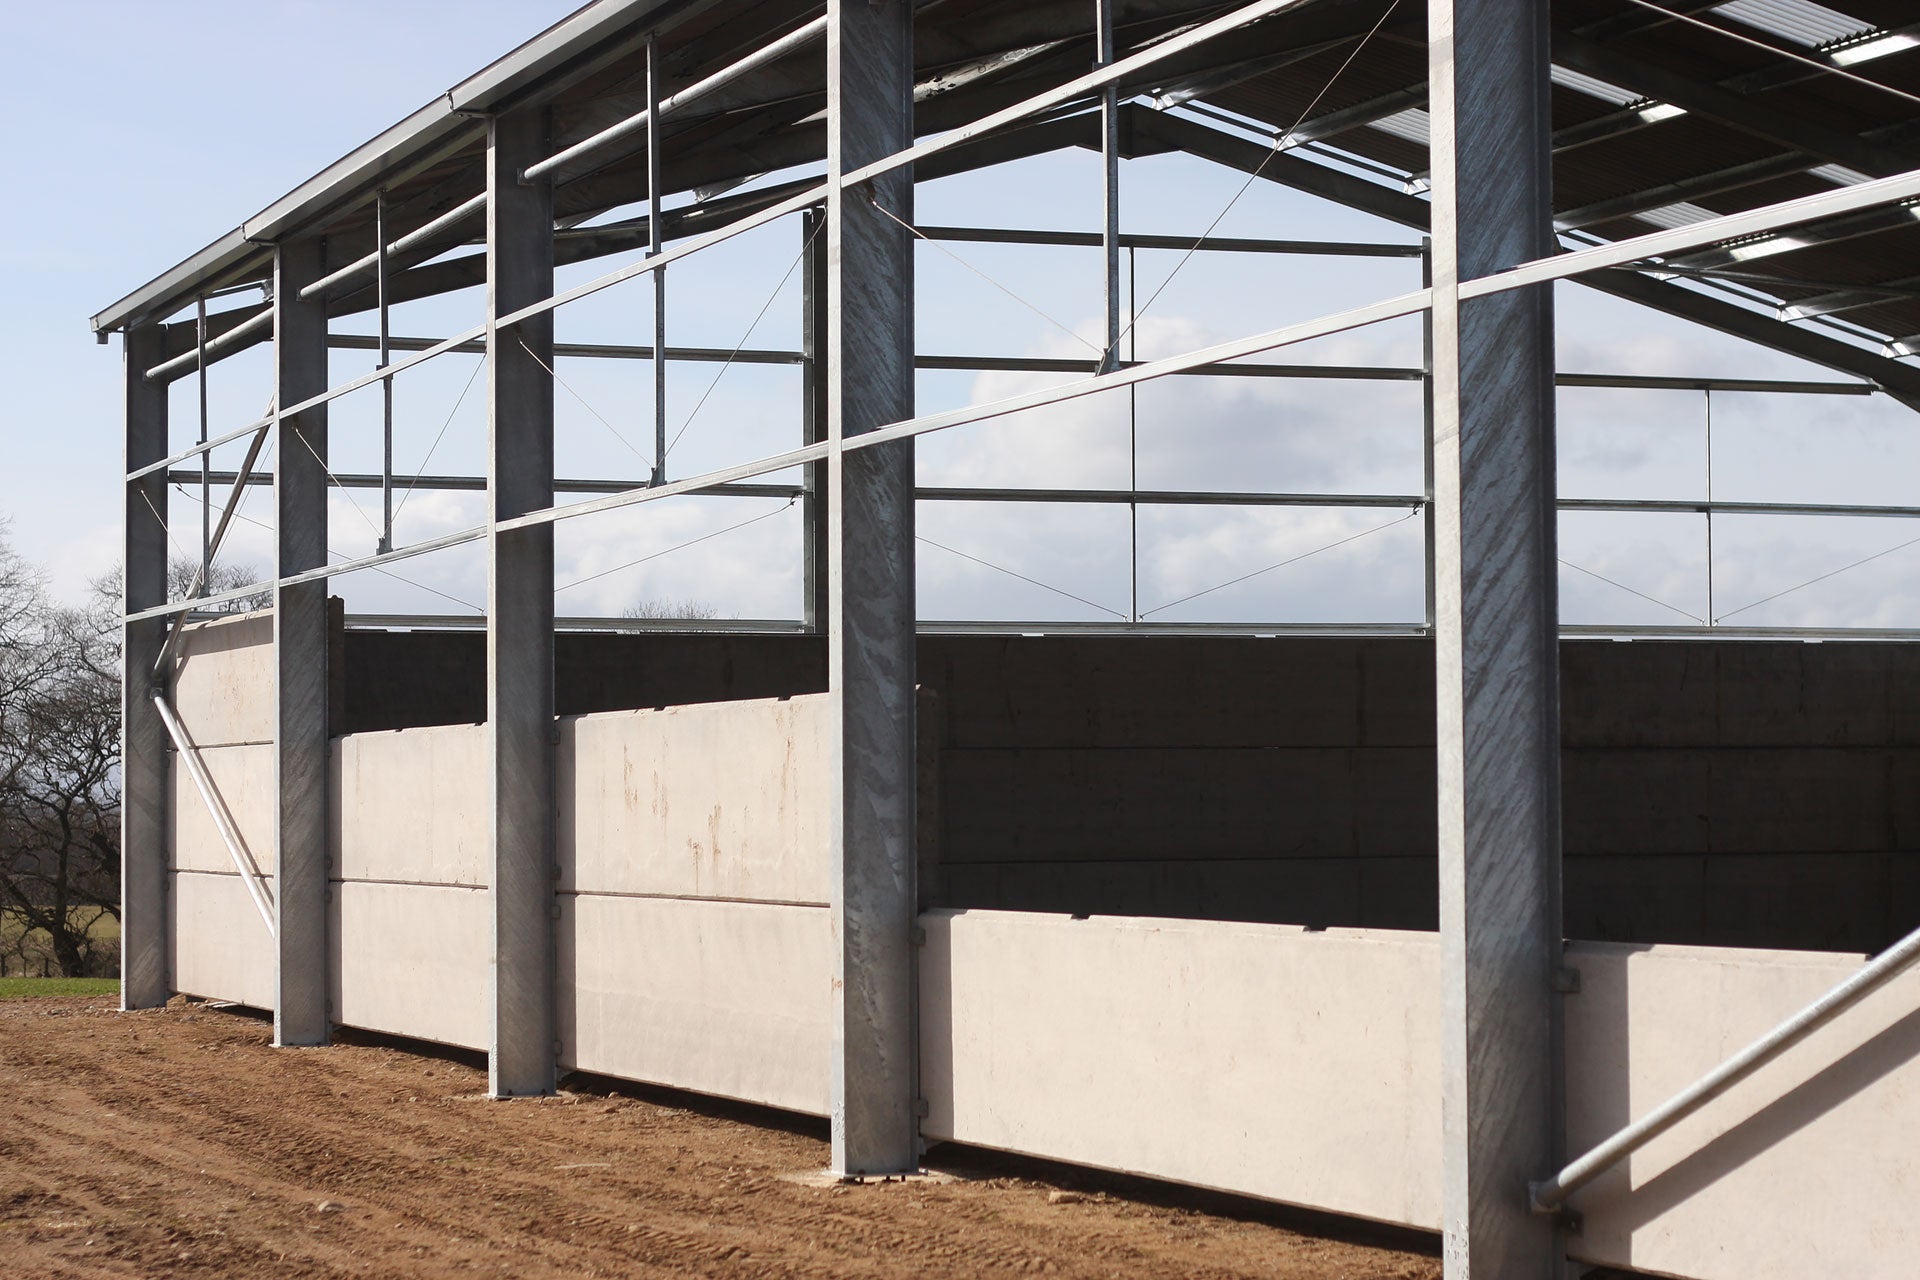 Image shows a half-completed barn, with concrete panels installed along the side